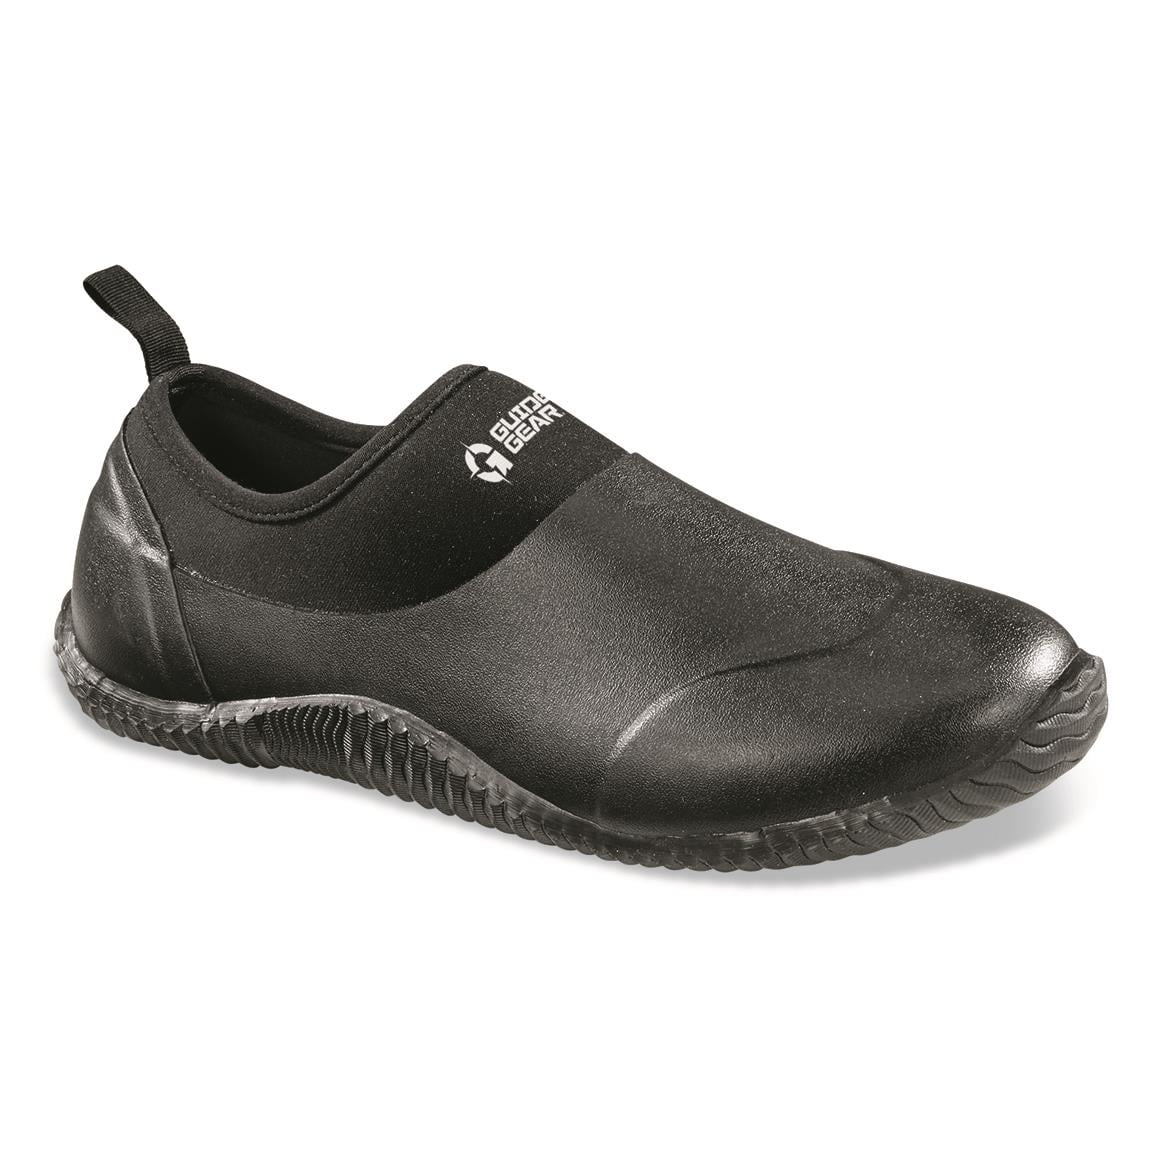 Roxoni Men's Rubber Sport Clogs with Breathable Mesh Upper